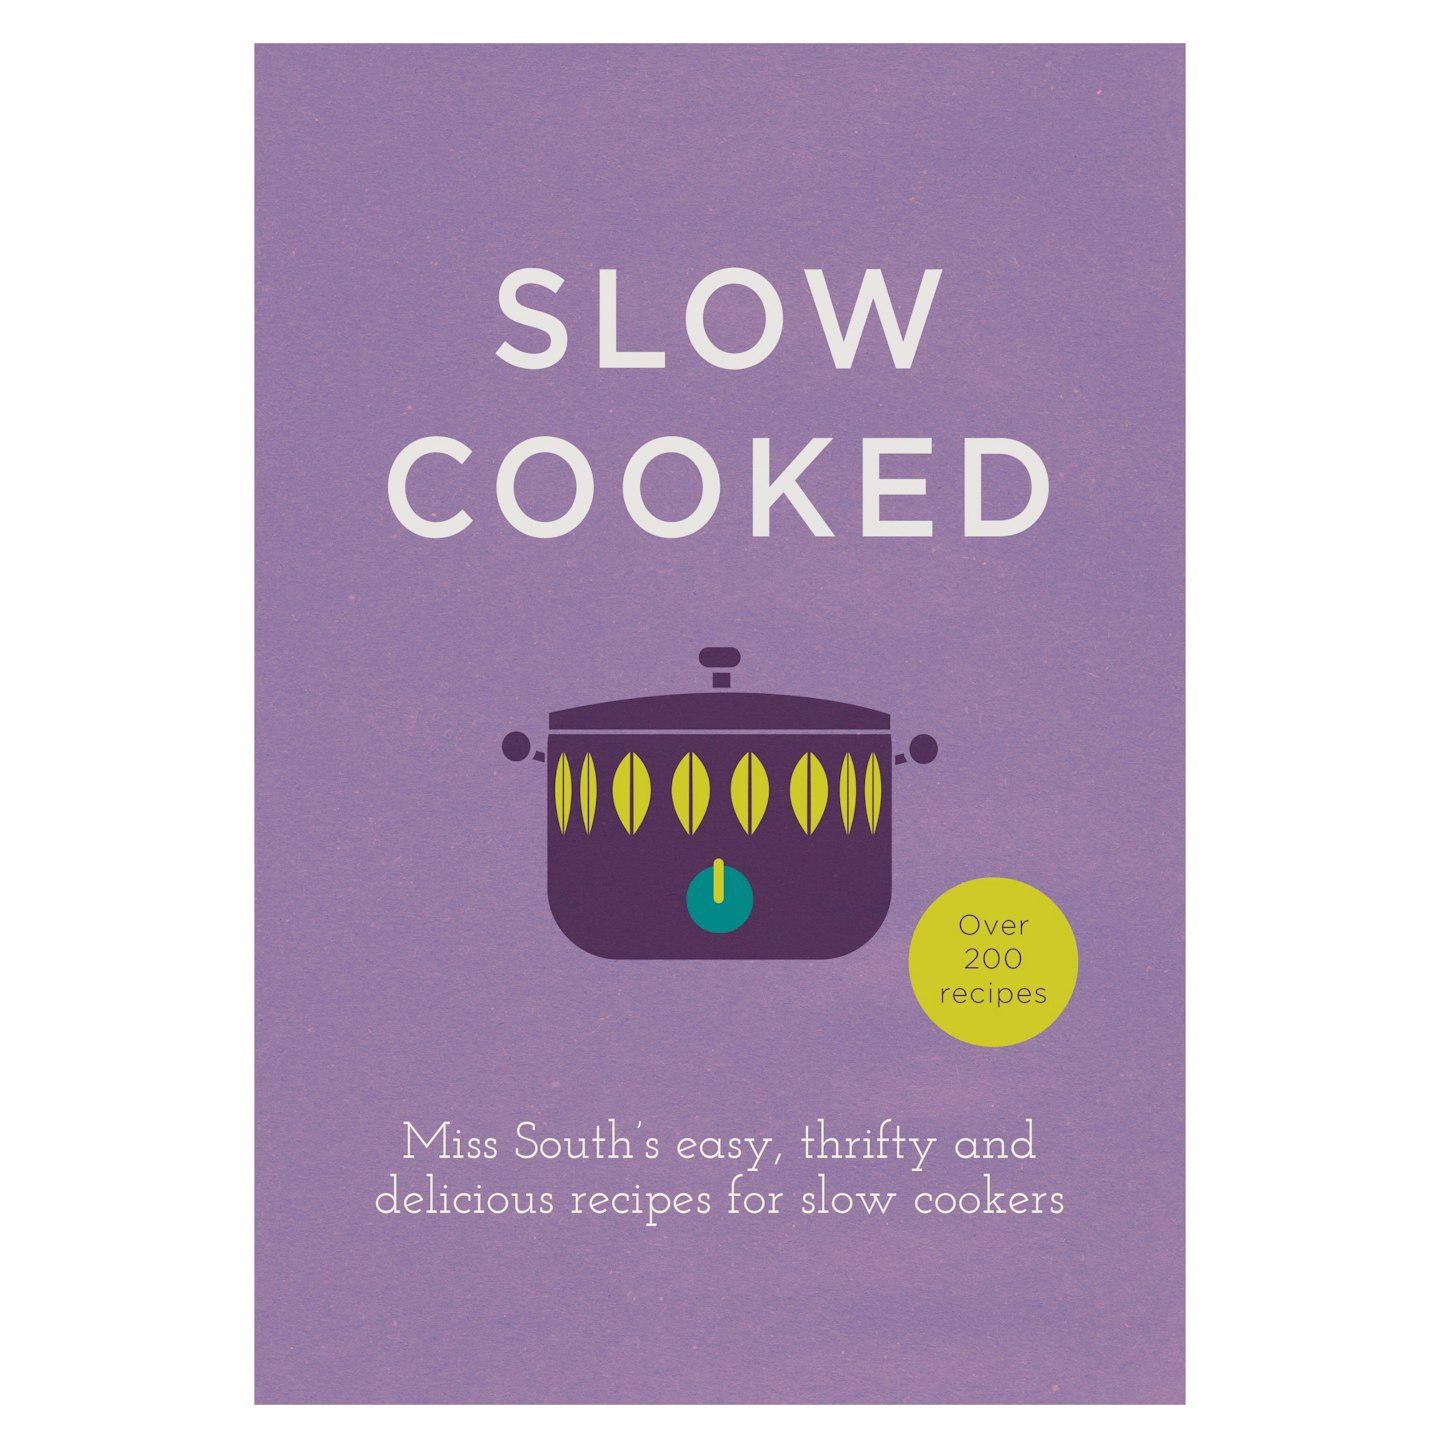 Slow Cooked by Miss South